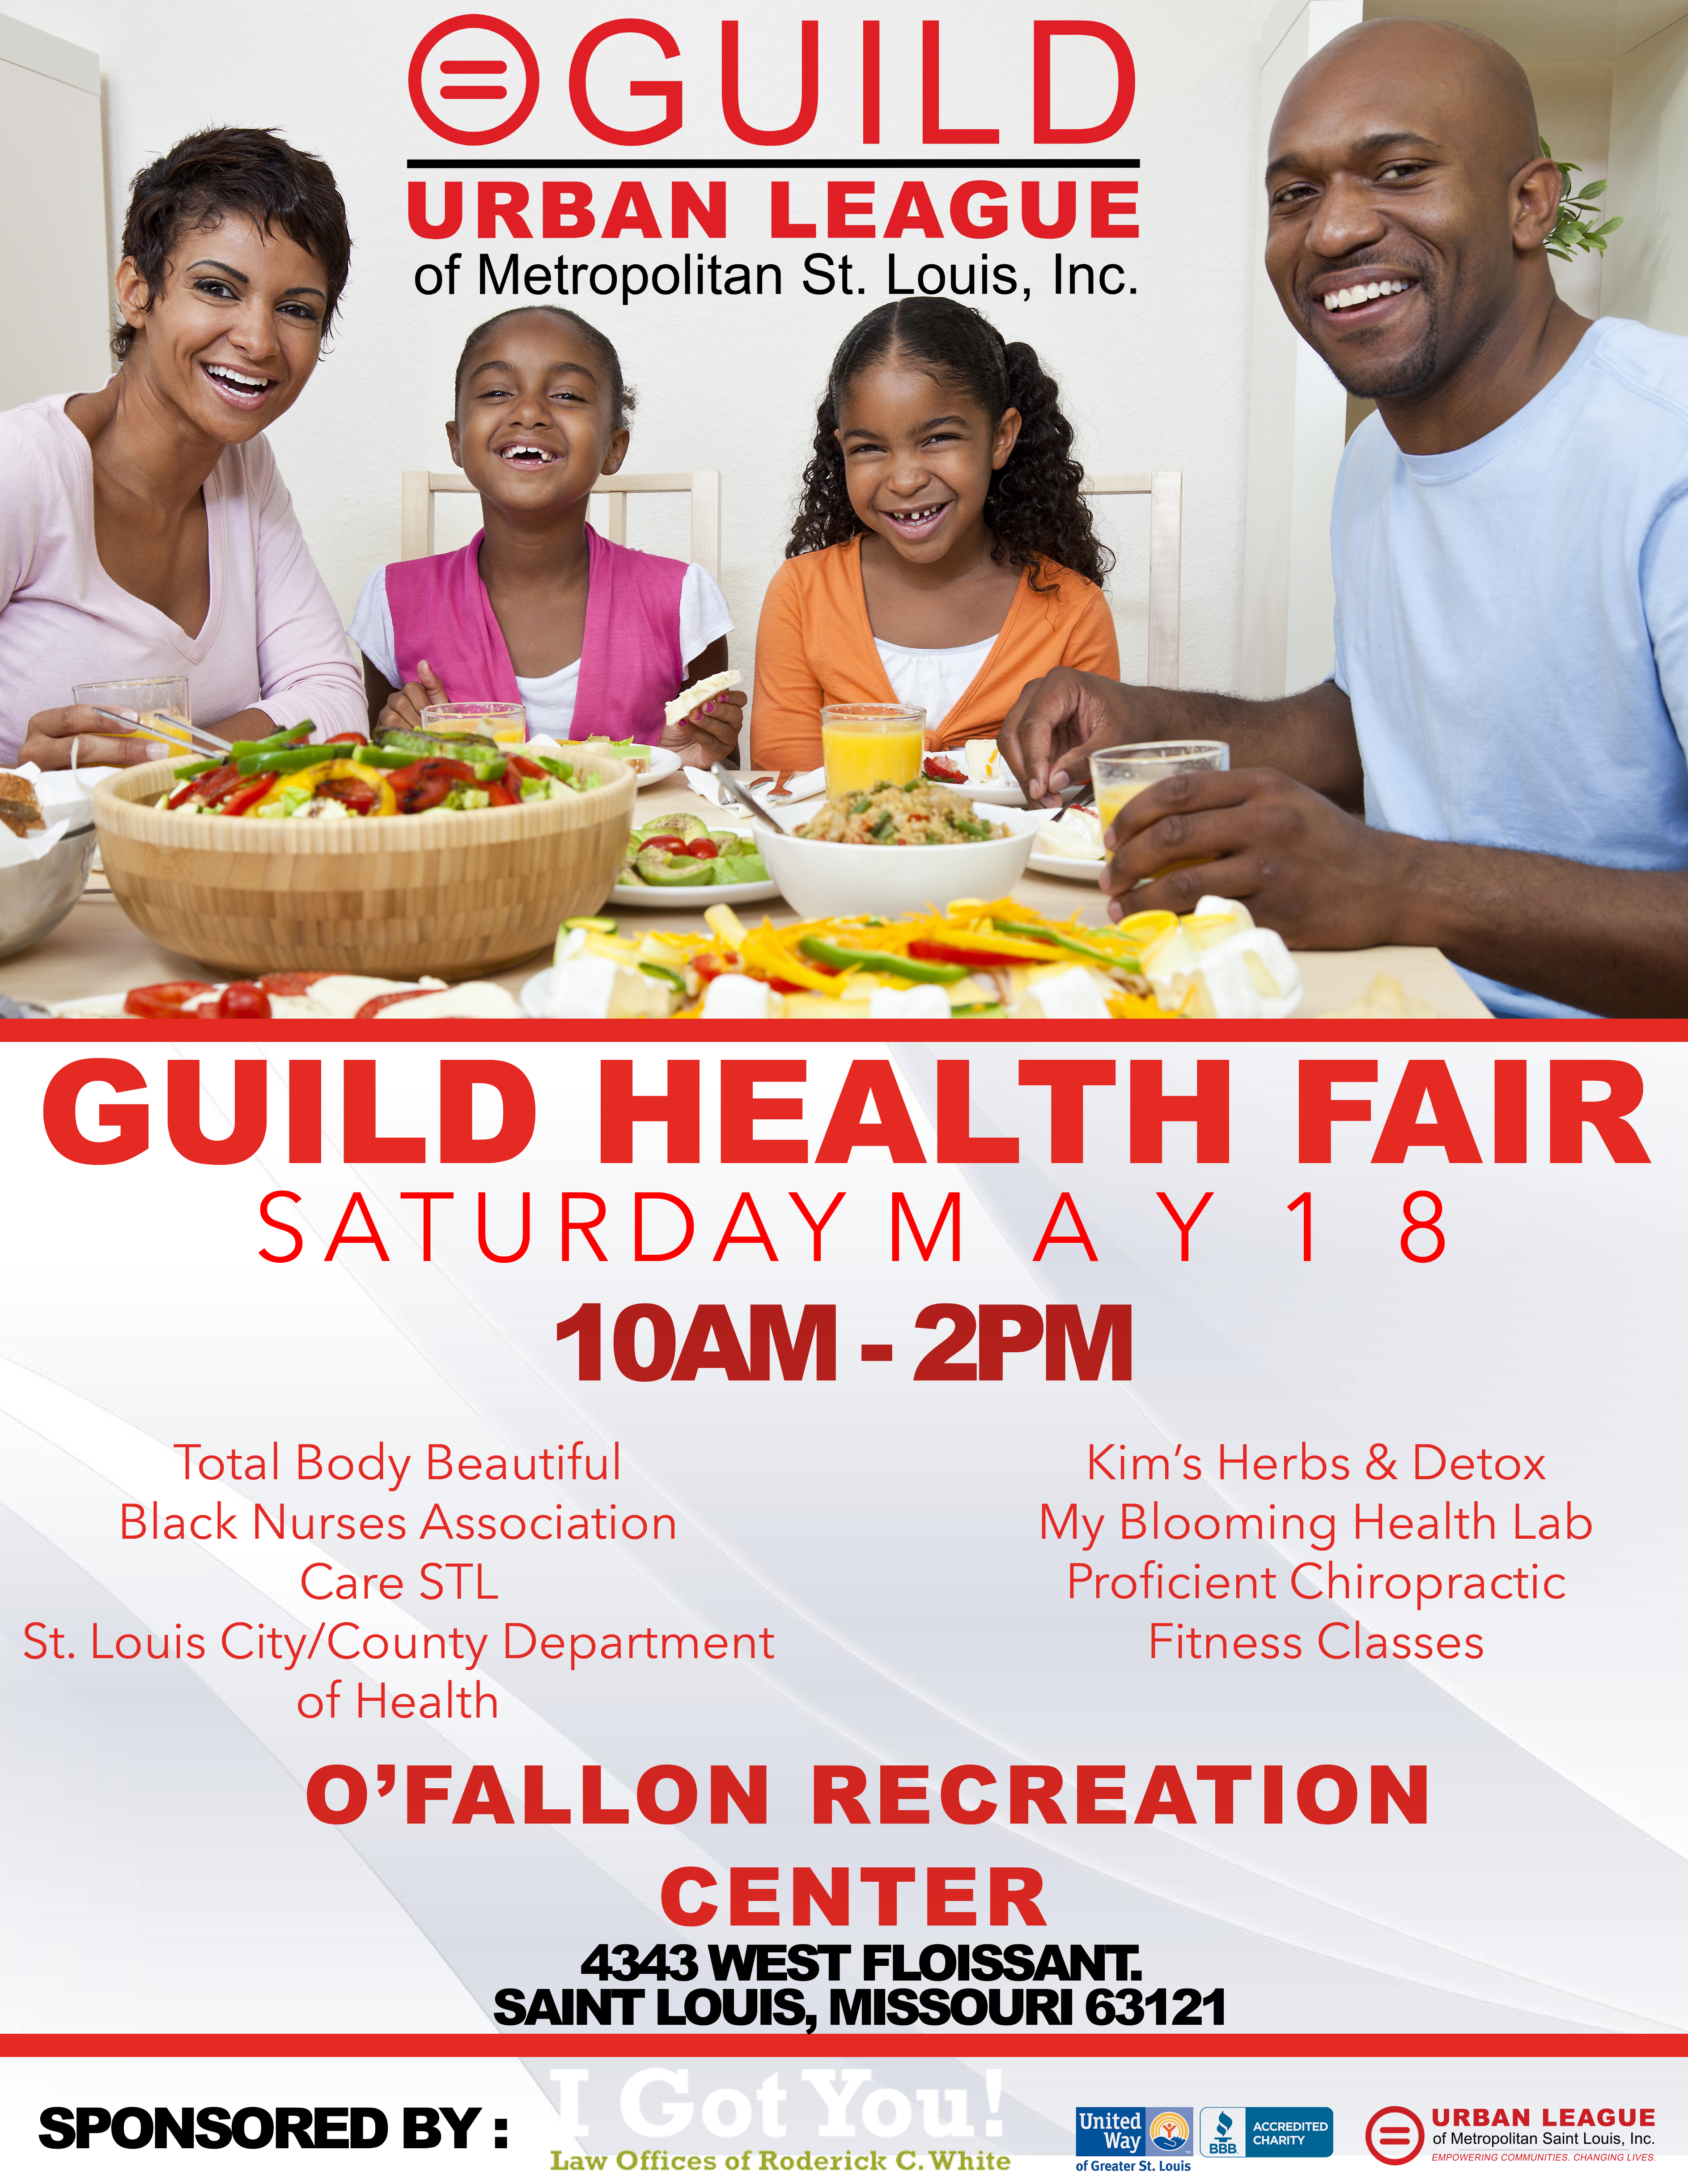 Information flyer about the upcoming Guild Health Fair